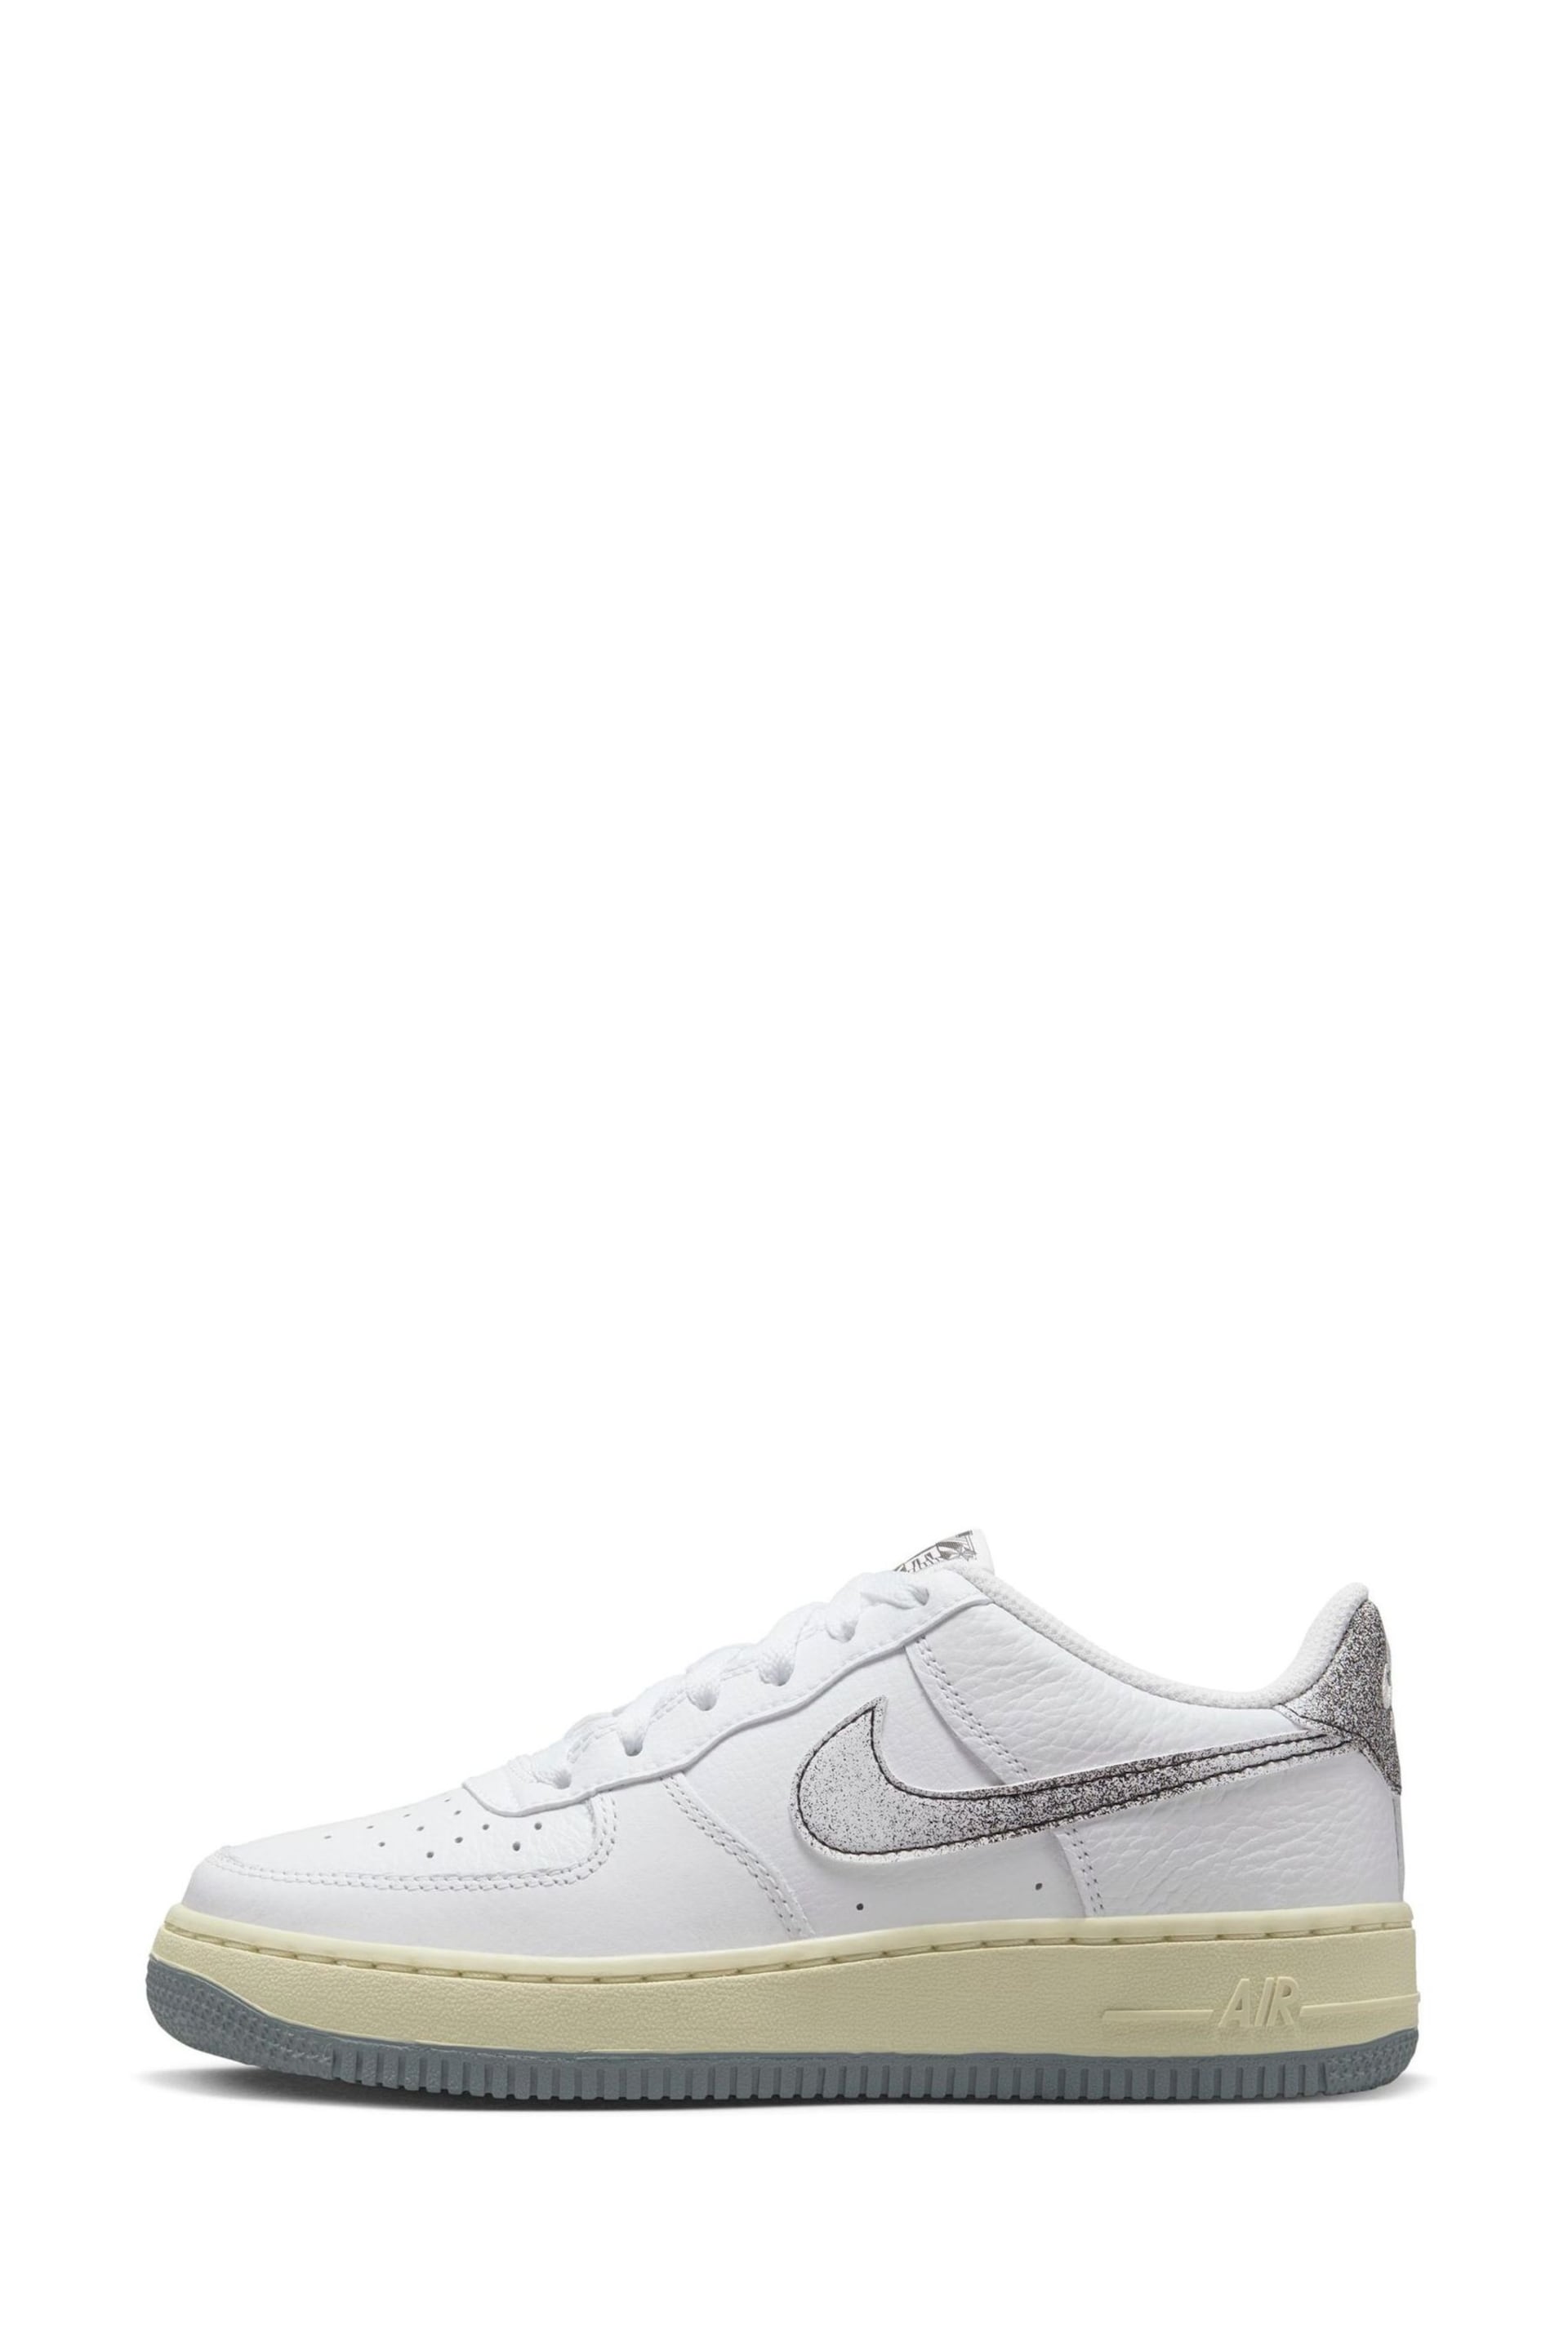 Nike White Air Force 1 LV8 3 Youth Trainers - Image 2 of 12